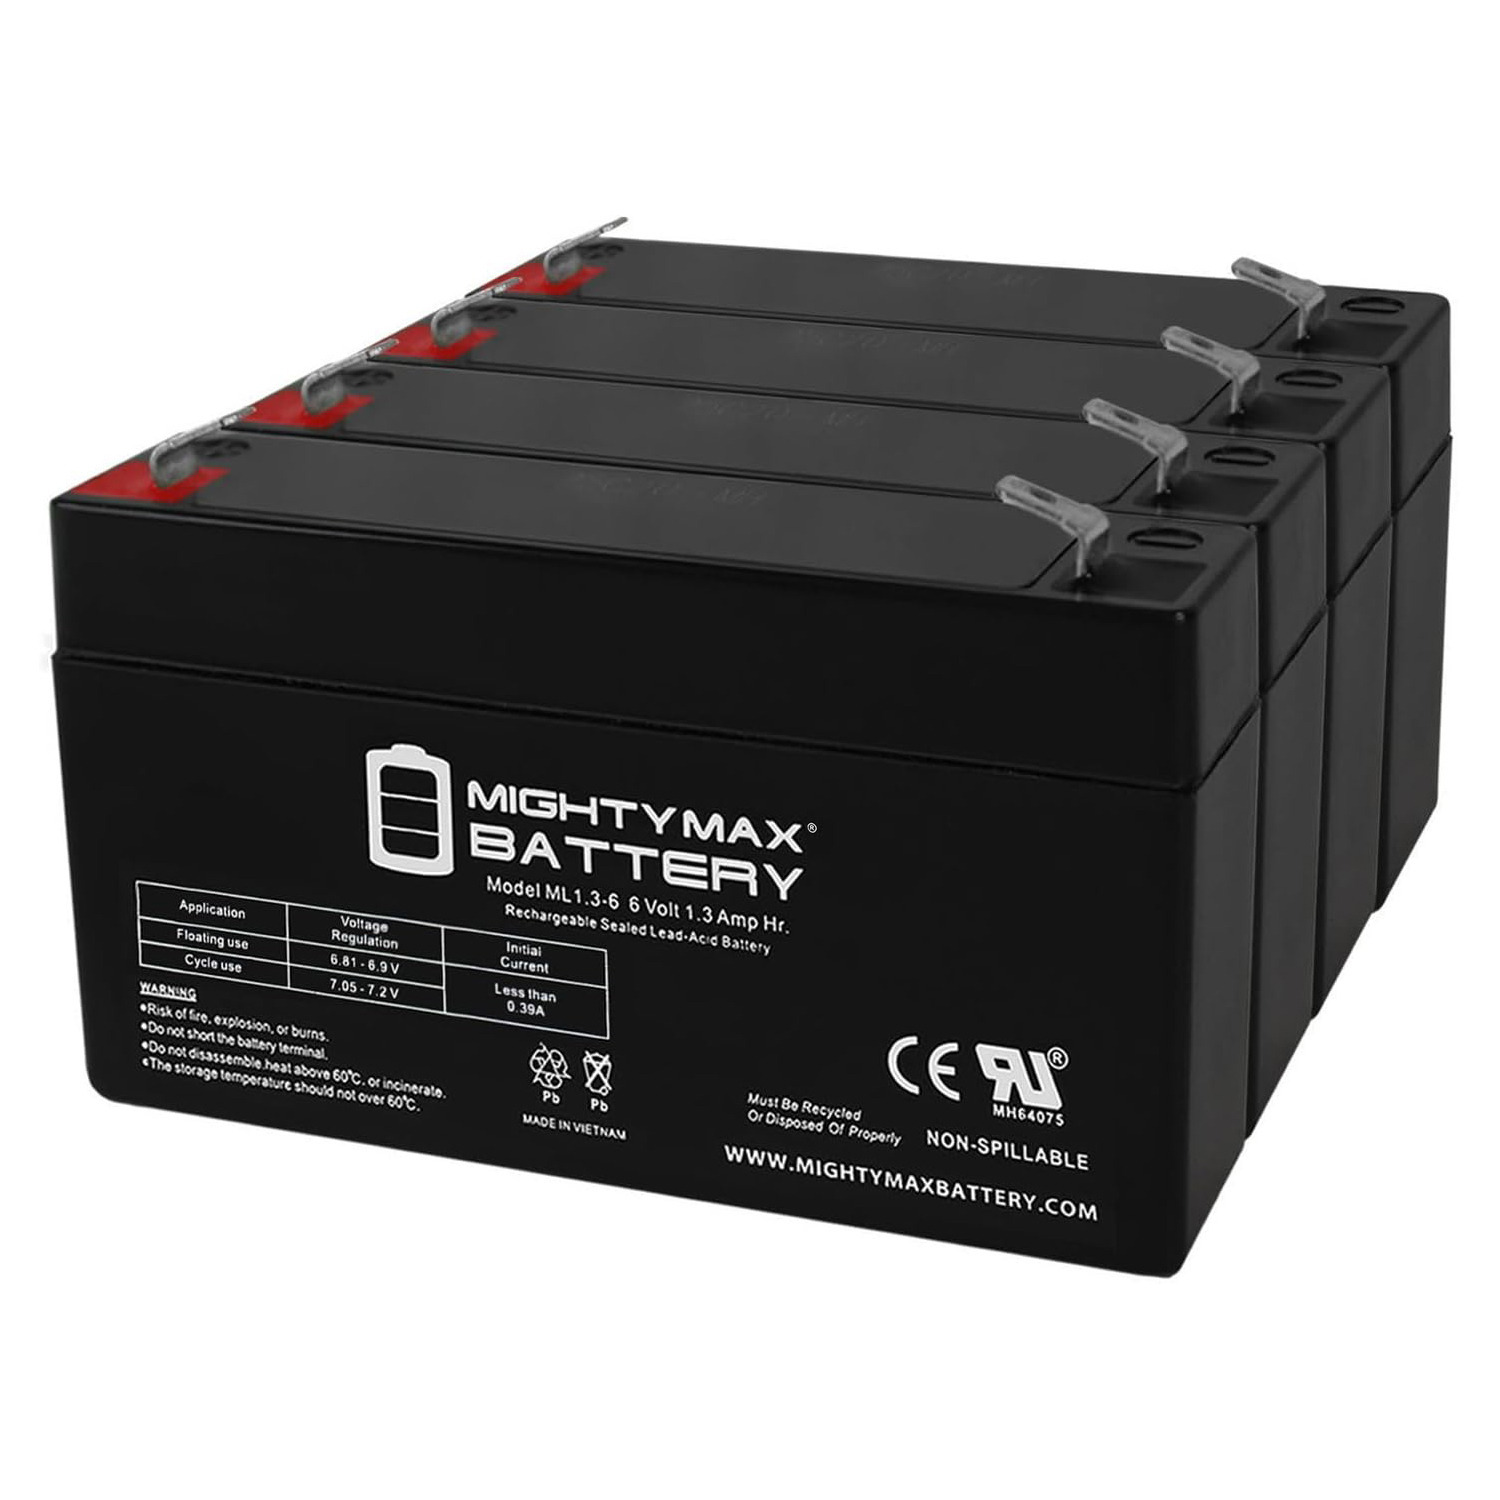 6V 1.3Ah SLA Replacement Battery for Acme Medical System 5000 - 4 Pack